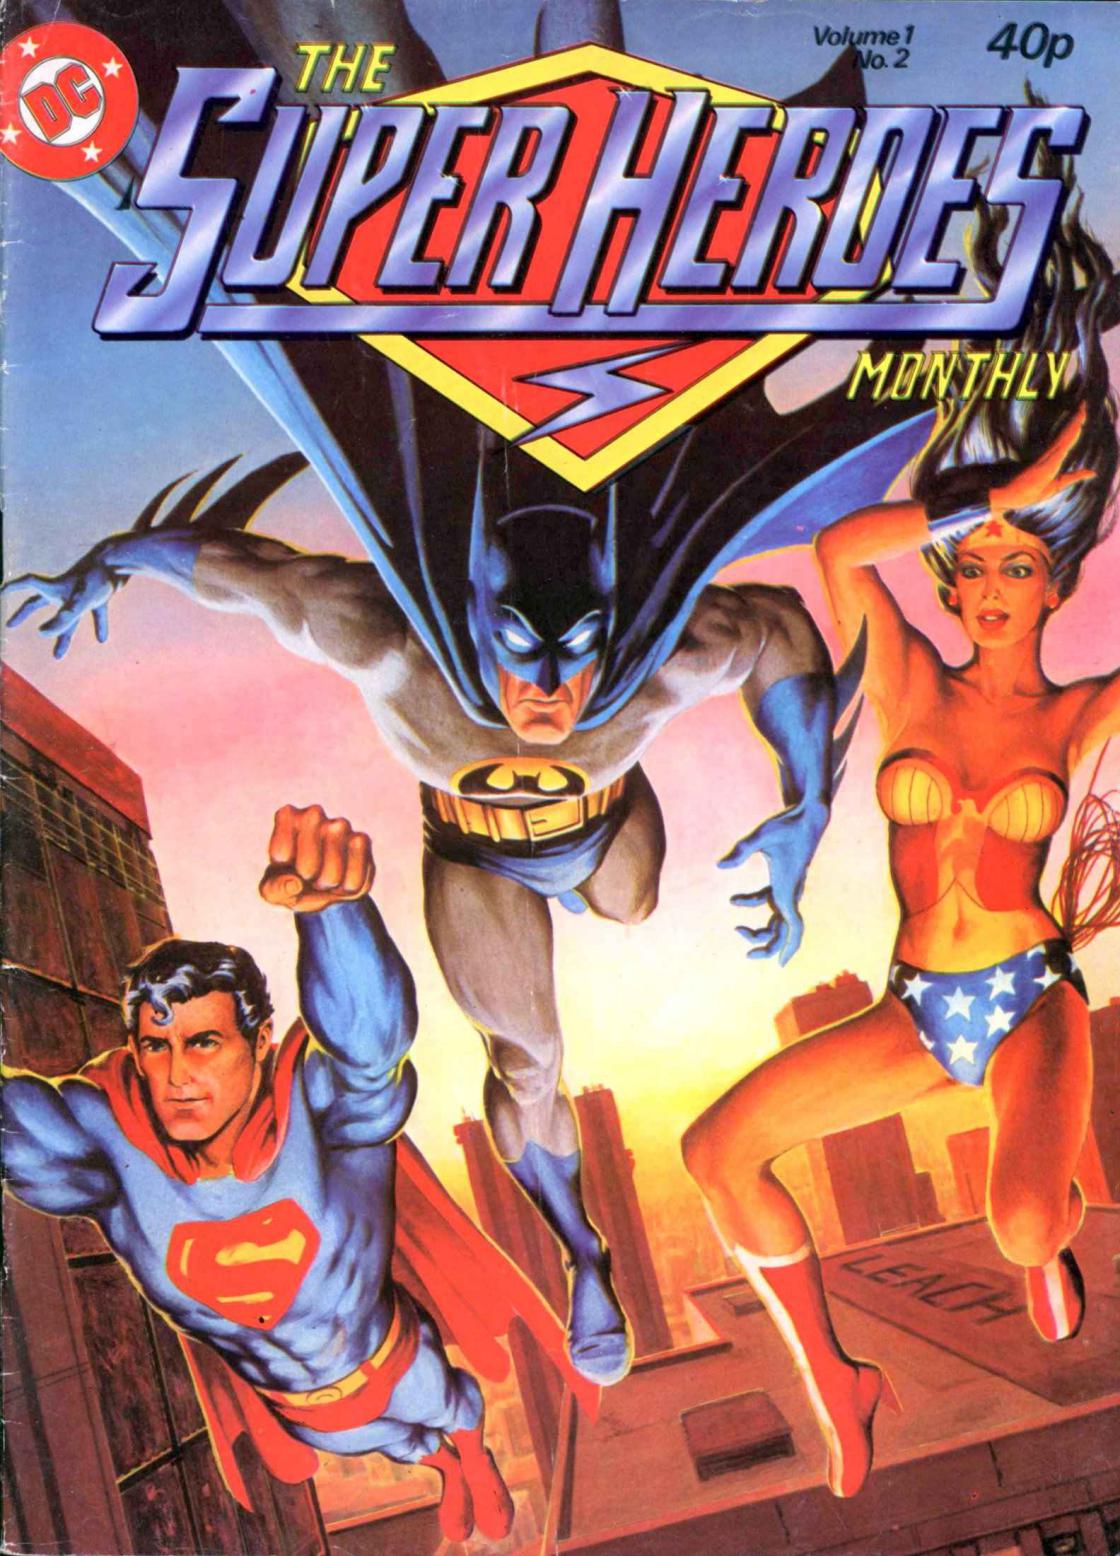 The Superheroes Monthly Issue Two - cover by Garry Leach